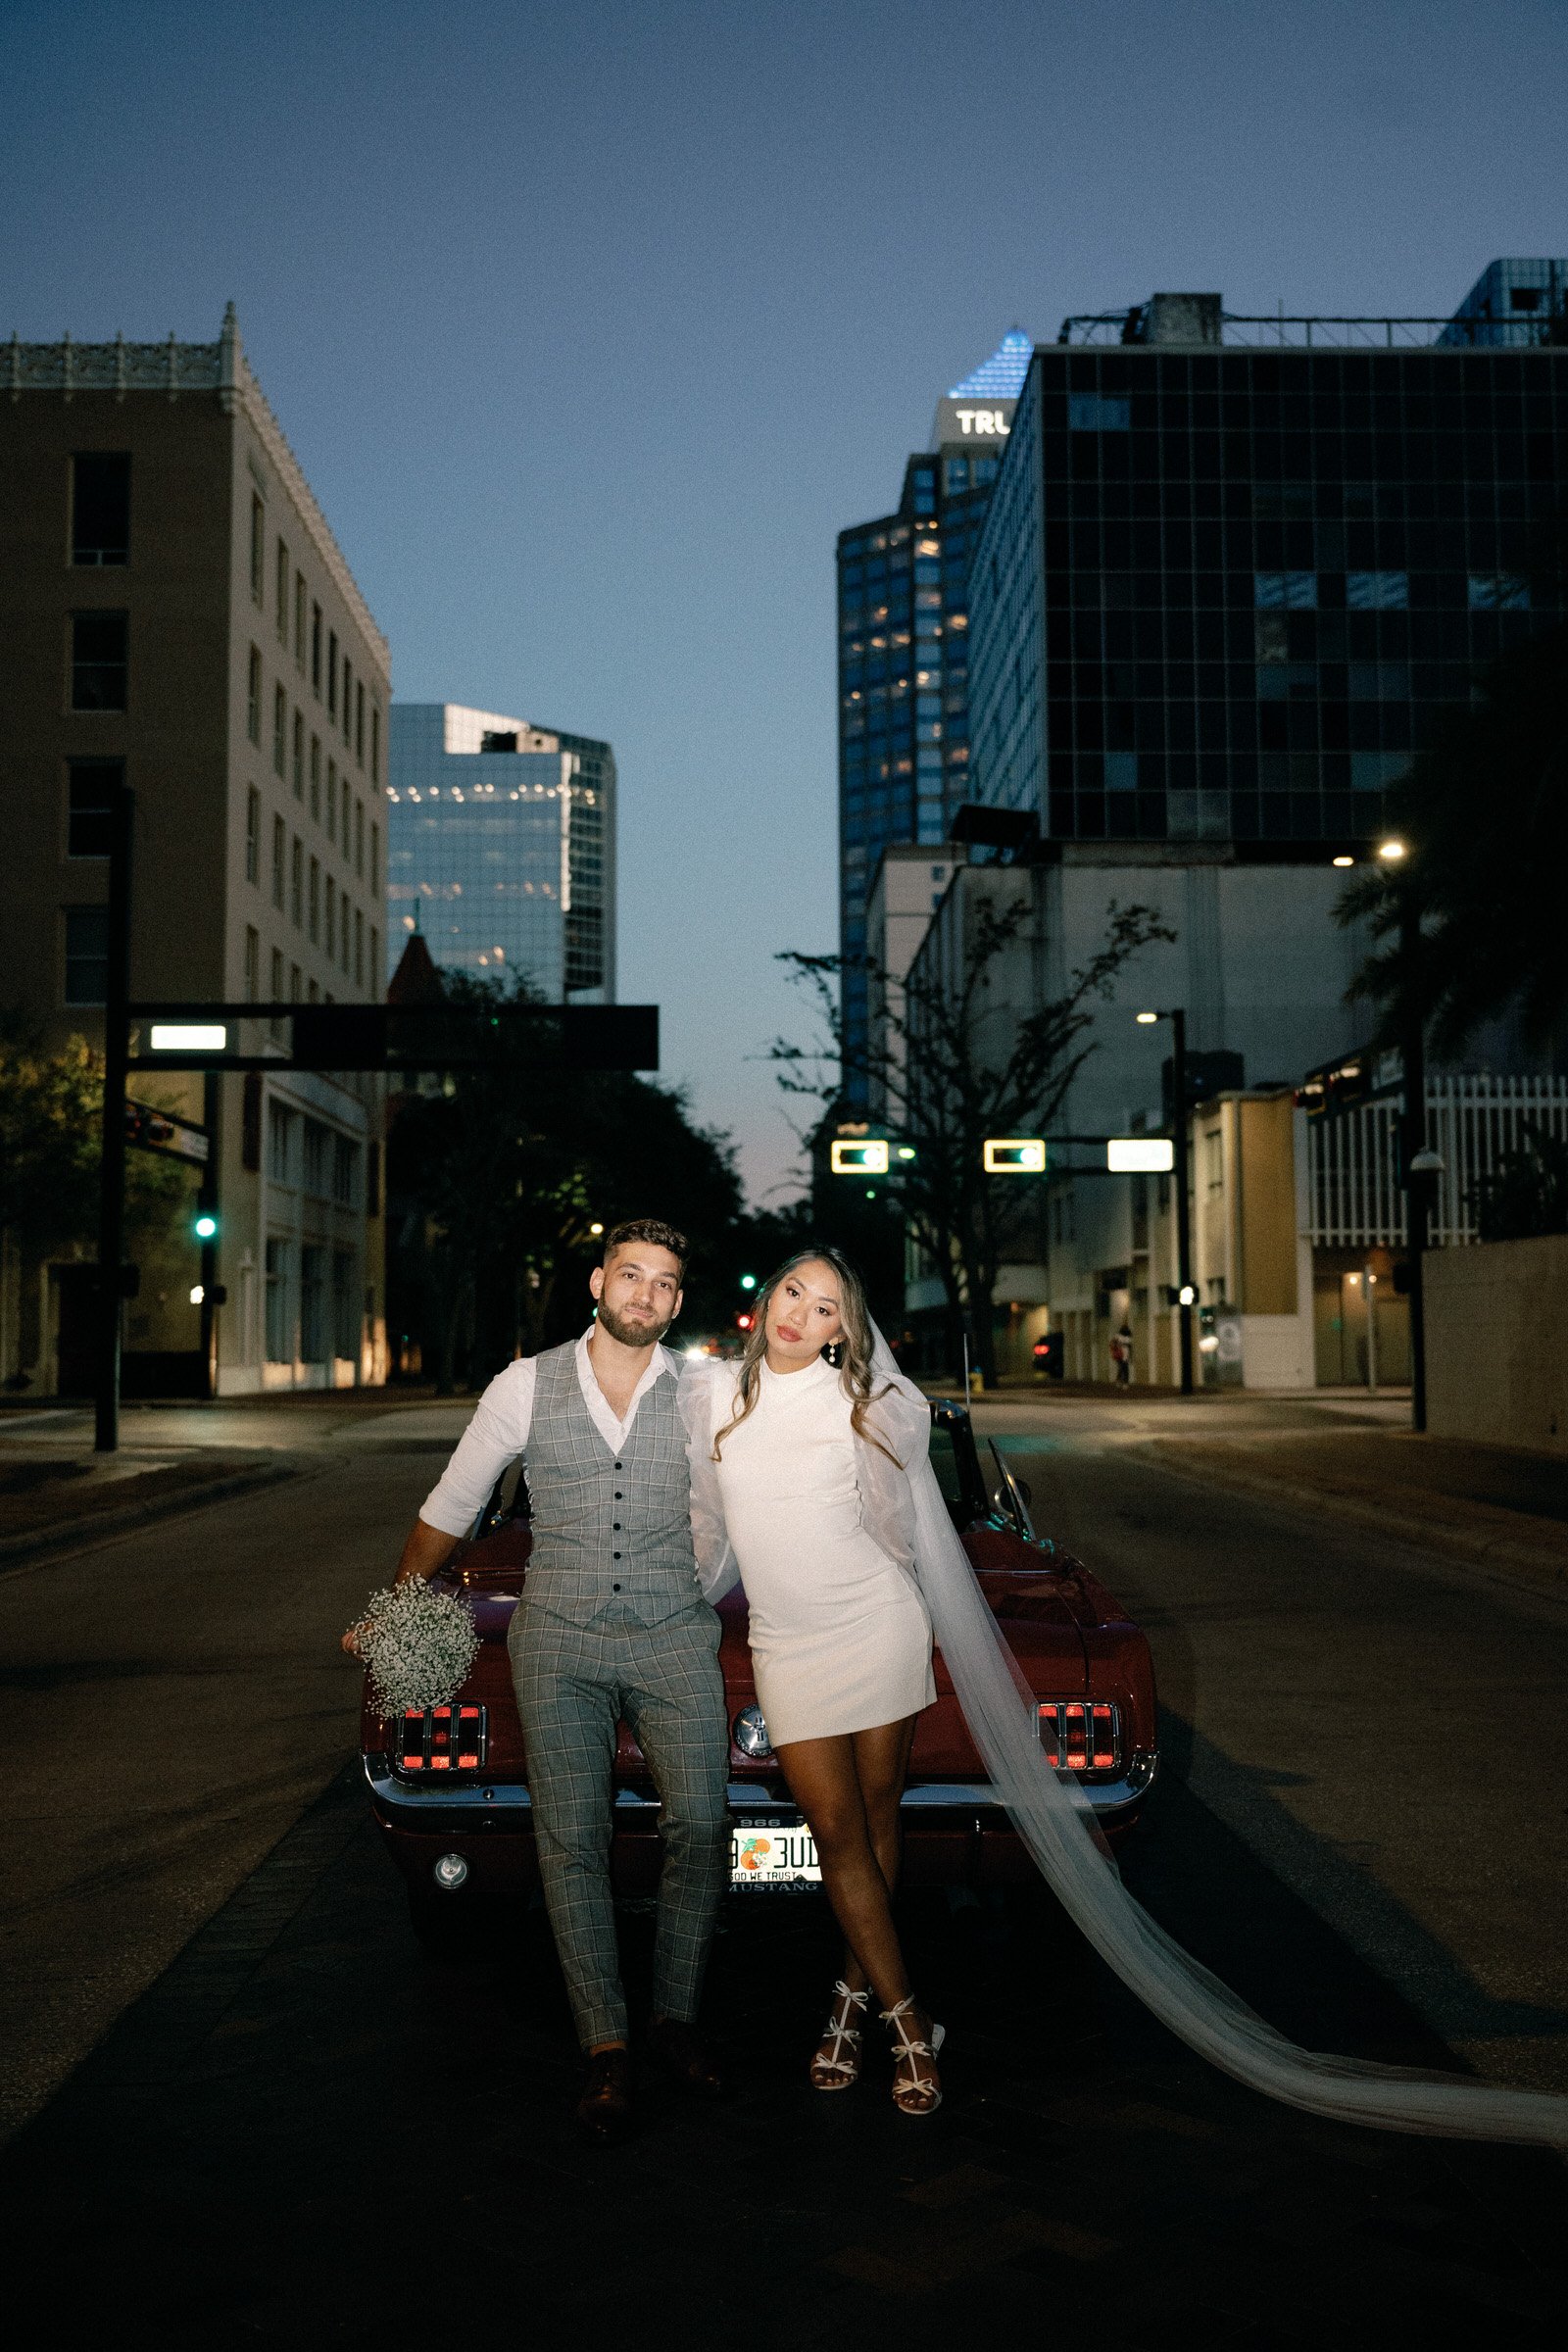 Copyright-Dewitt-for-Love-Photography-M-M-Ybor-City-Tampa-Engagement-Session-107.jpg